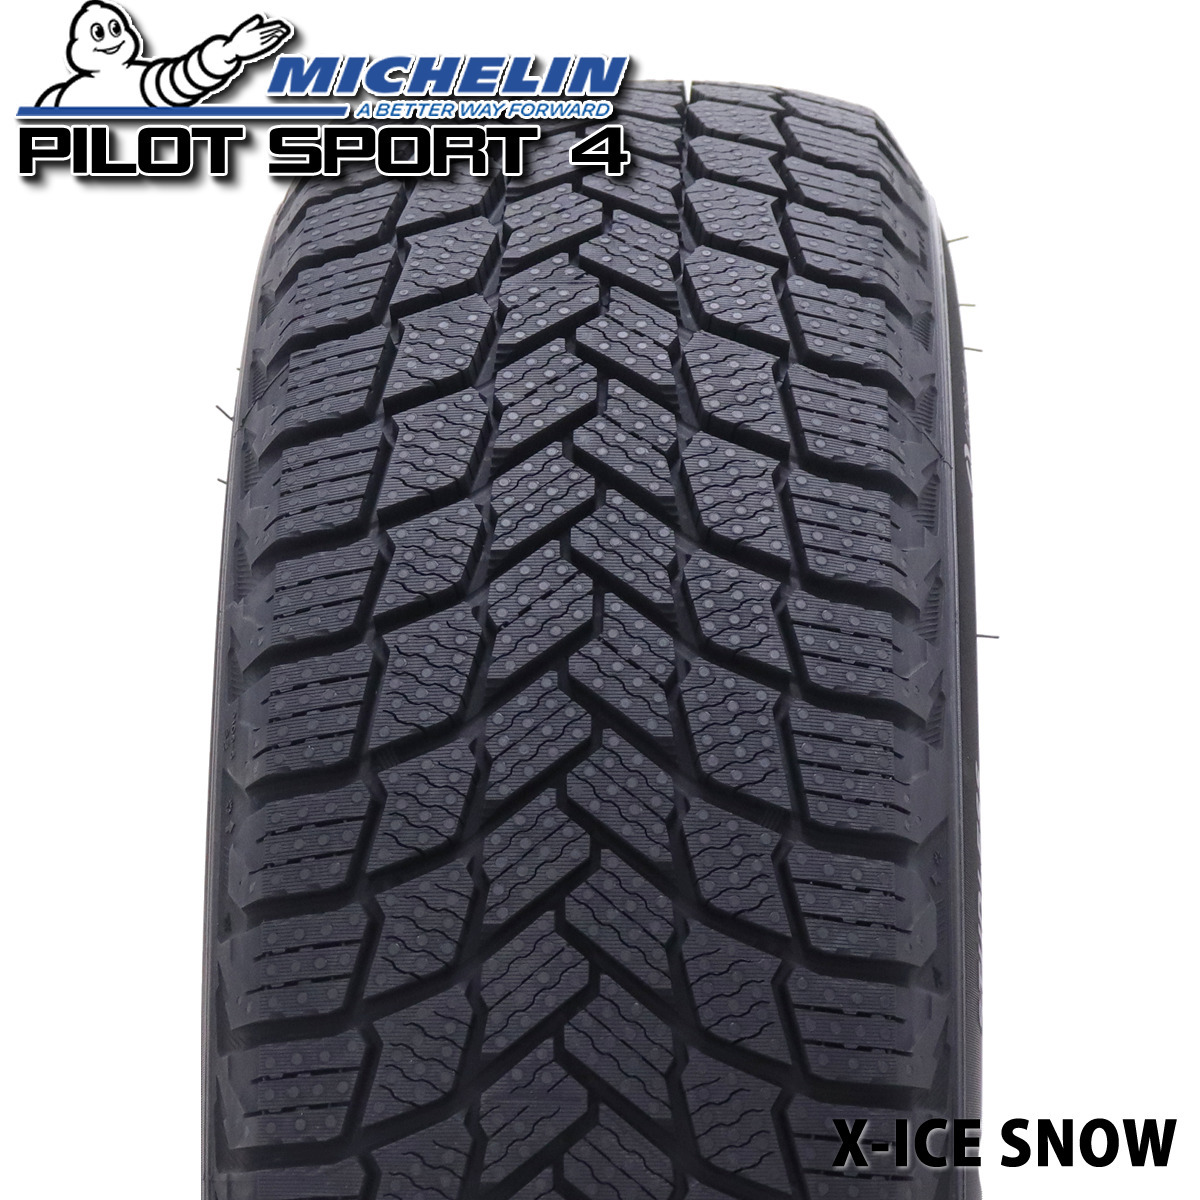 2023 year made new goods 4ps.@ price trader free shipping 205/60R16 96H winter Michelin X-ICE SNOW Noah VOXY step SAI Prius α NO,MC1633